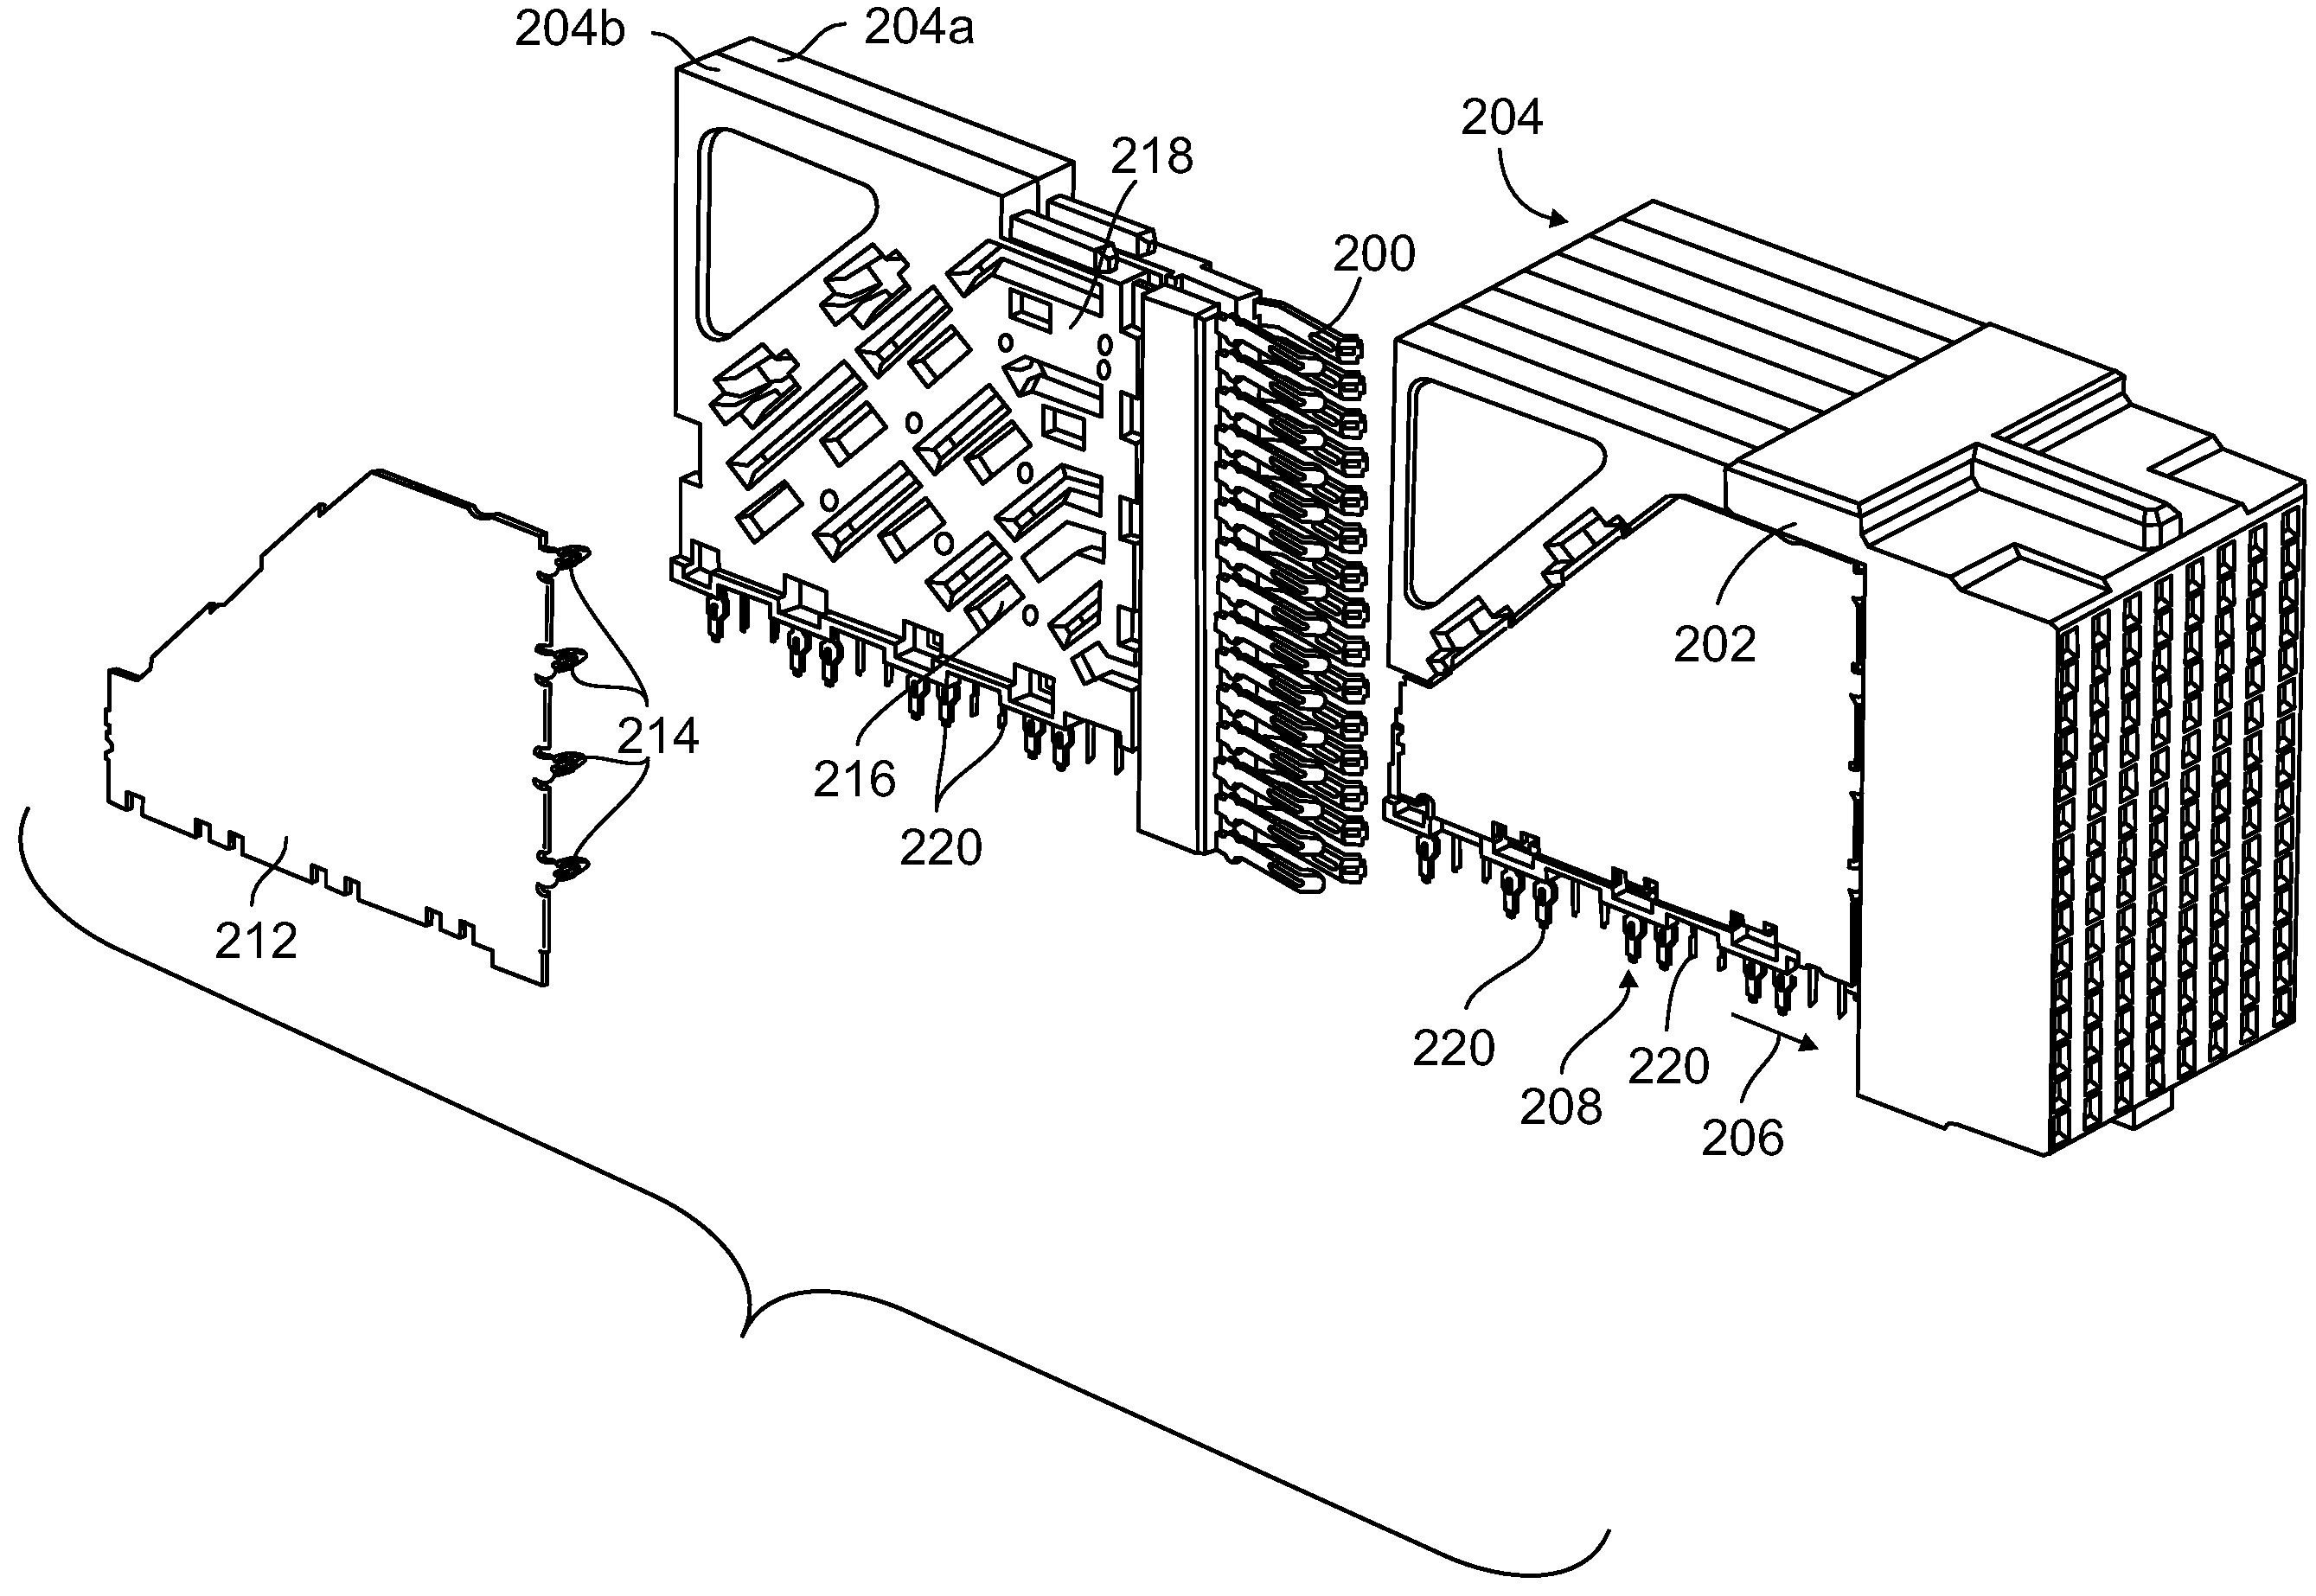 Compliant pin for retaining and electrically connecting a shield with a connector assembly